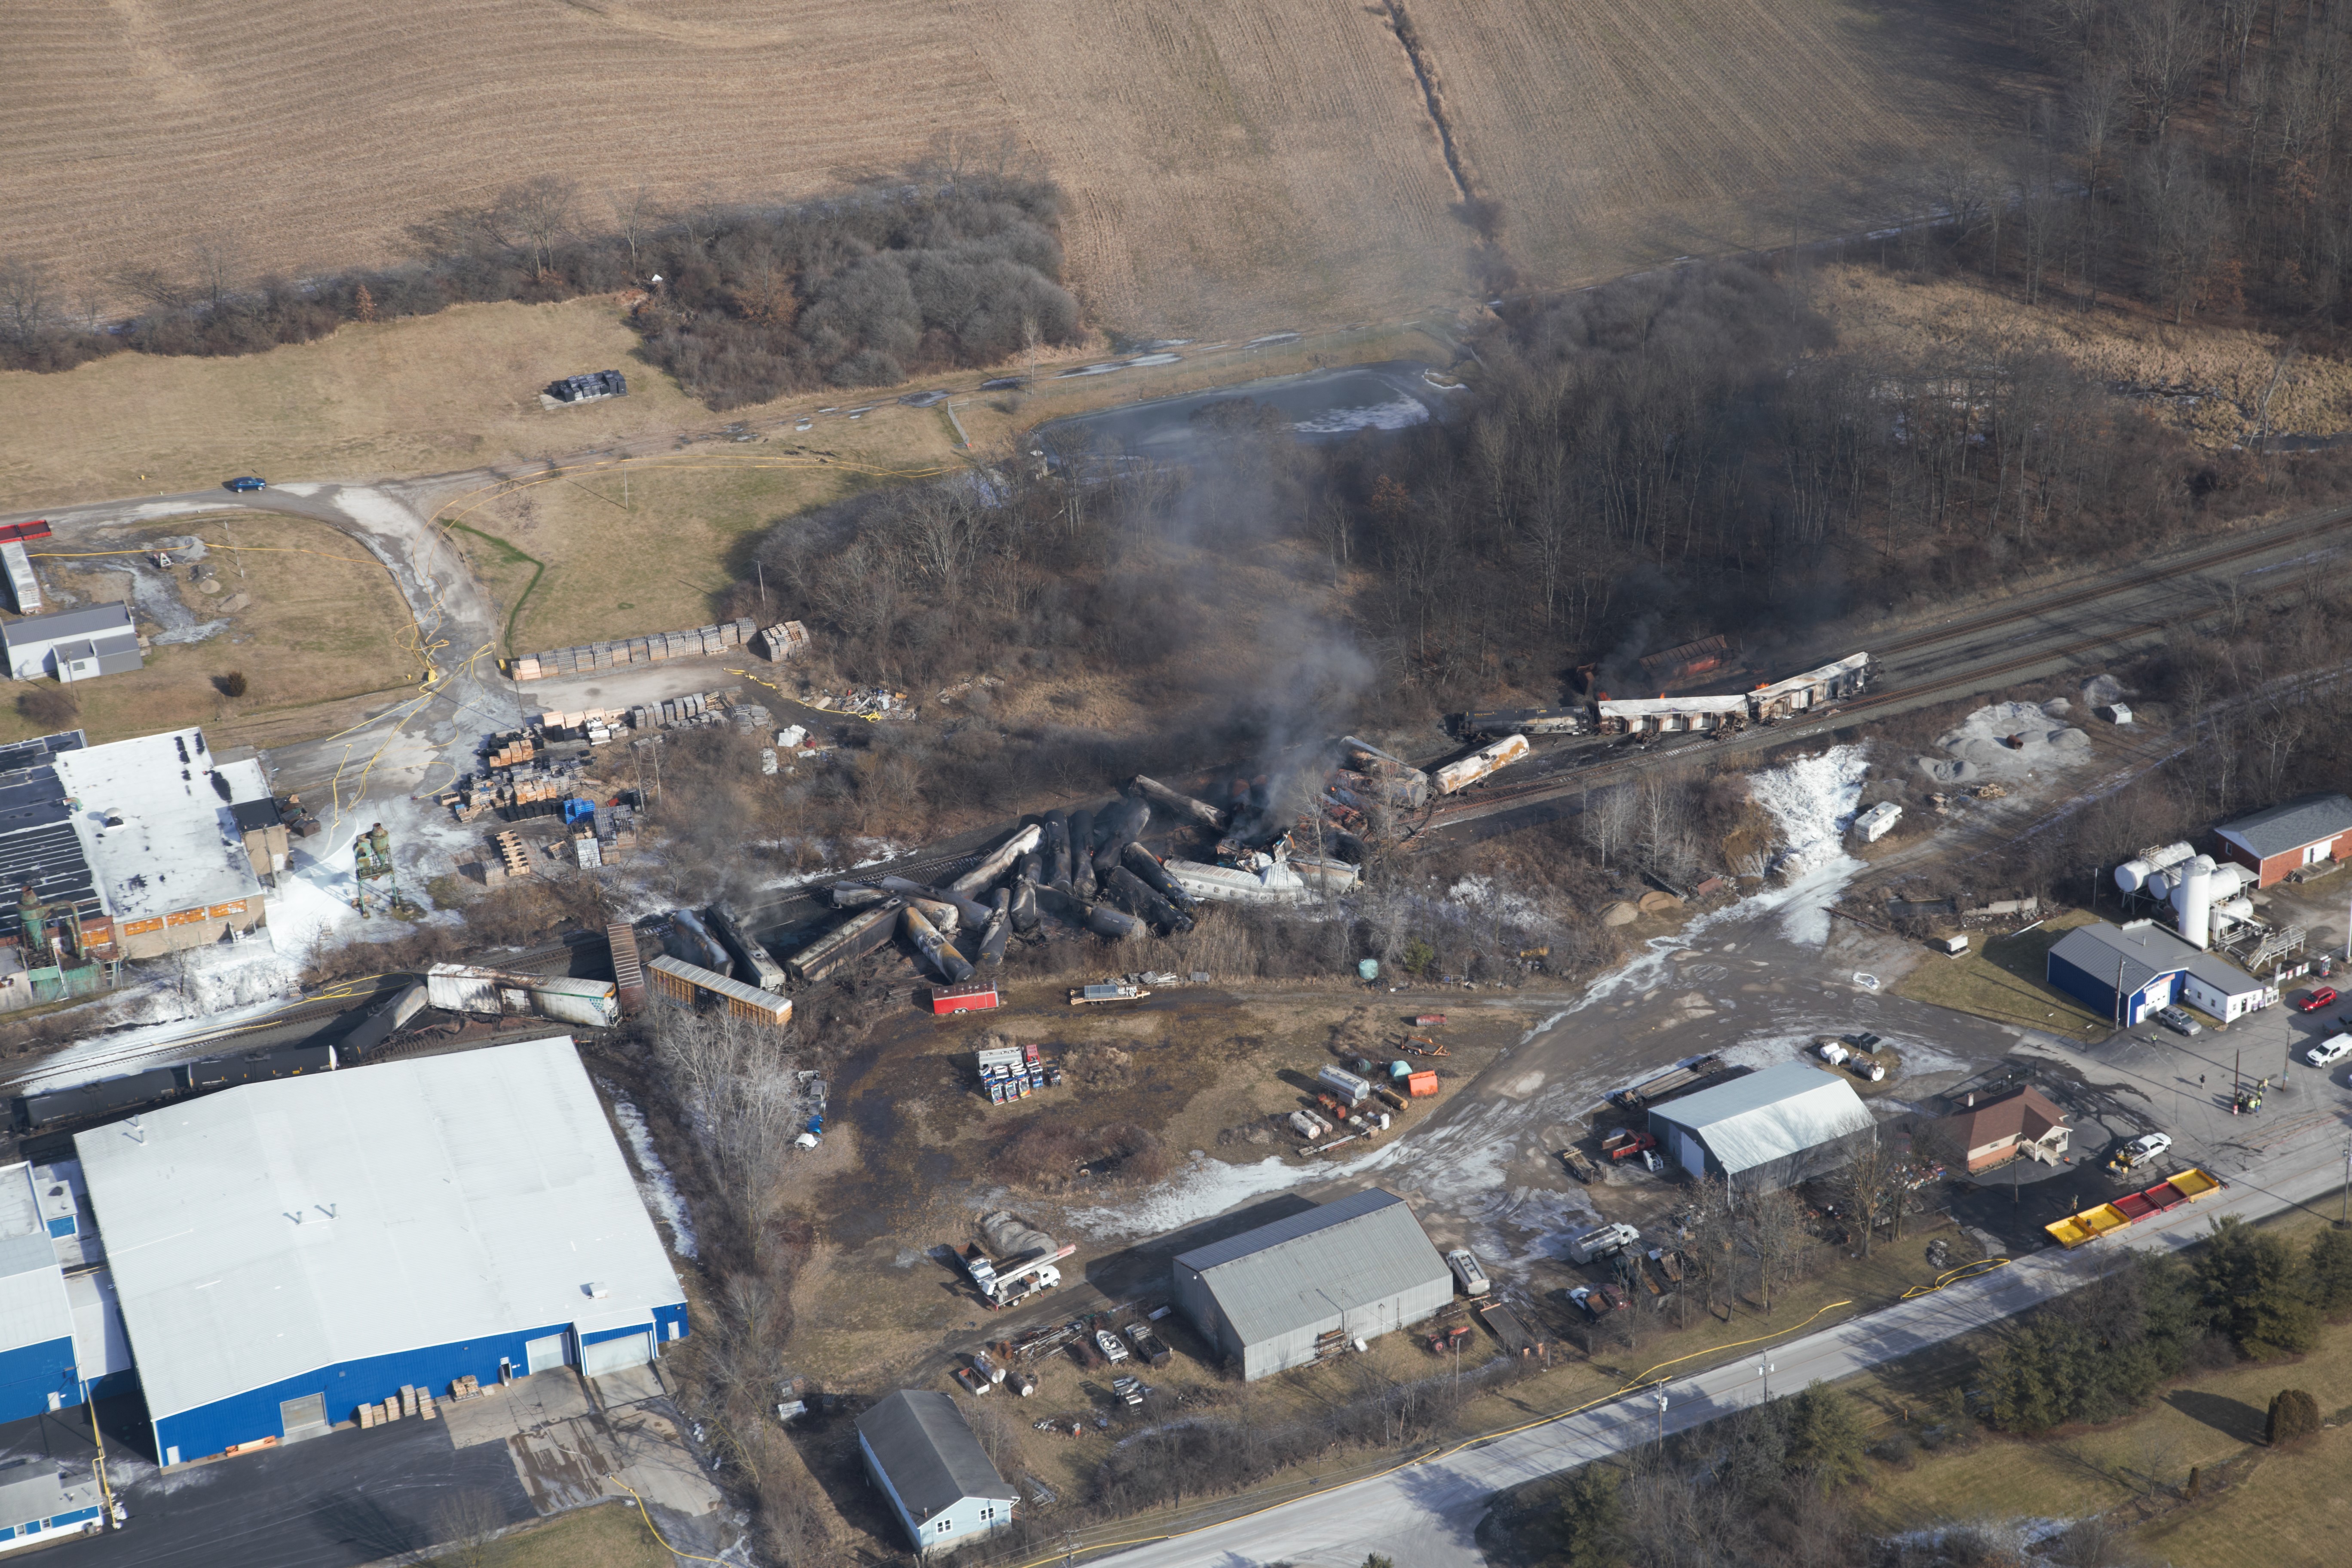 An aerial photo view of the Norfolk Southern freight train derailment in East Palestine, Ohio captured on Feb. 5. 